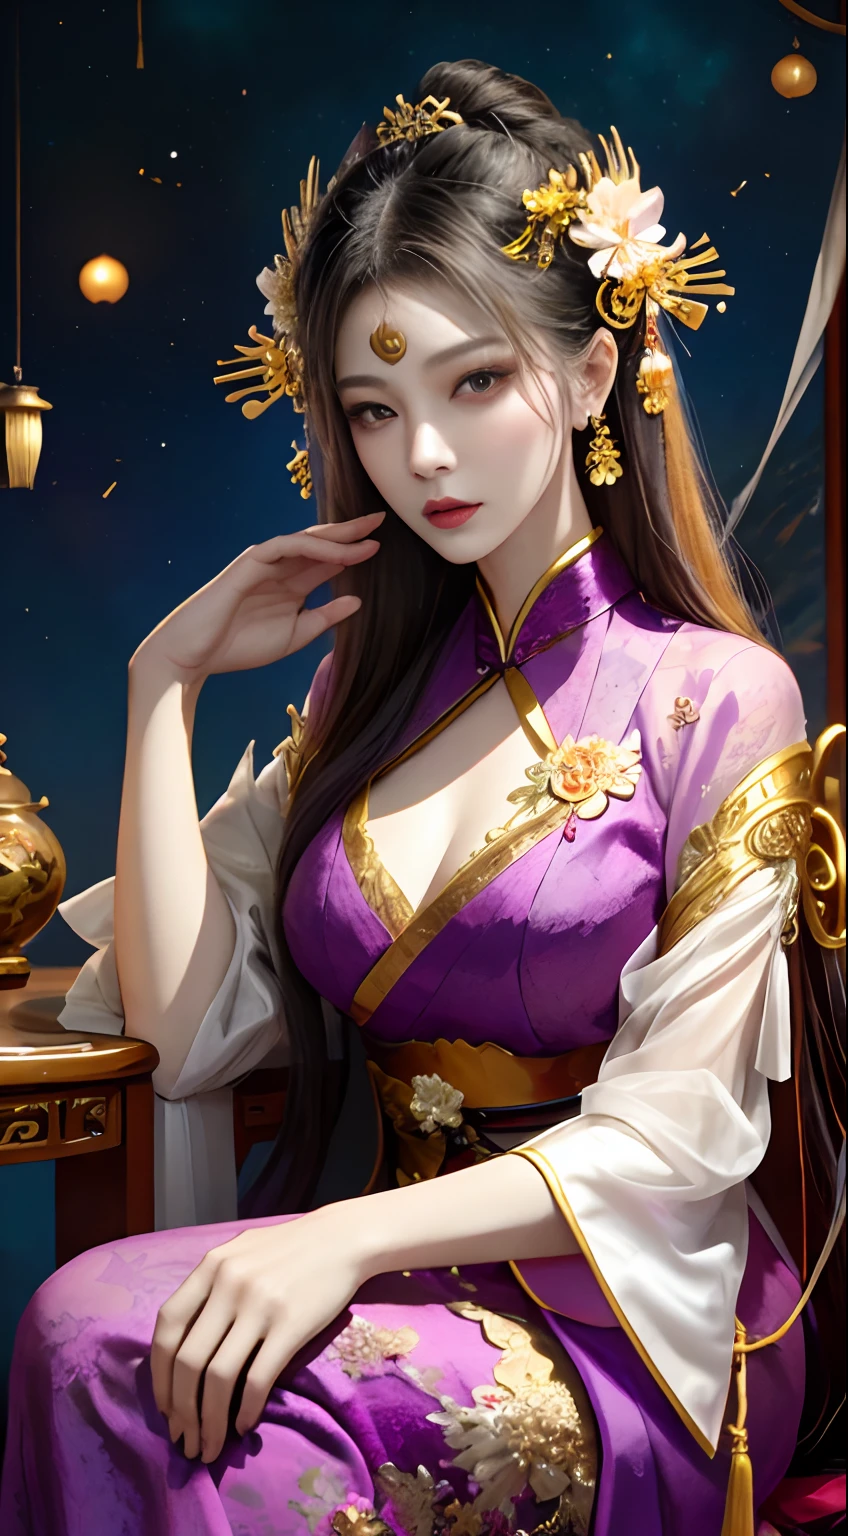 1 27-year-old girl, 1 zodiac goddess from the future, goddess of the pink and purple 12 zodiacs, the goddess of the zodiac in a yellow ao dai, a 12 zodiac ao dai with many black lace detail, mythology Goddess of the 12 zodiacs from the future, zodiac ♏, luxurious glittering zodiac style, dark and mysterious version, zodiac crown, lipstick lips red, thin and beautiful lips, mouth closed, characters made by karol bak and pino daeni, intricate detail, detailed background, extremely detailed, light magic, a woman, clear face, hair long with bangs, beautiful face in detail and well-proportioned eyes, (transparent yellow eyes: 1.8), big round eyes and very beautiful and detailed makeup, foresight, silk dress, mysterious makeup , double bangs and dyed light blonde , upper half portrait, zodiac goddess portrait, arms hanging loosely, Realistic and vivid photo, (stars make up the zodiac: 1.7), (sky background zodiac and fictitious space and time portal: 1.8), fiction art, RAW photo, hanfu picture, best photo, best photo quality, 8k quality, 8k ultra, super realistic, real photo most economical, the goddess poses sexy and seductive,